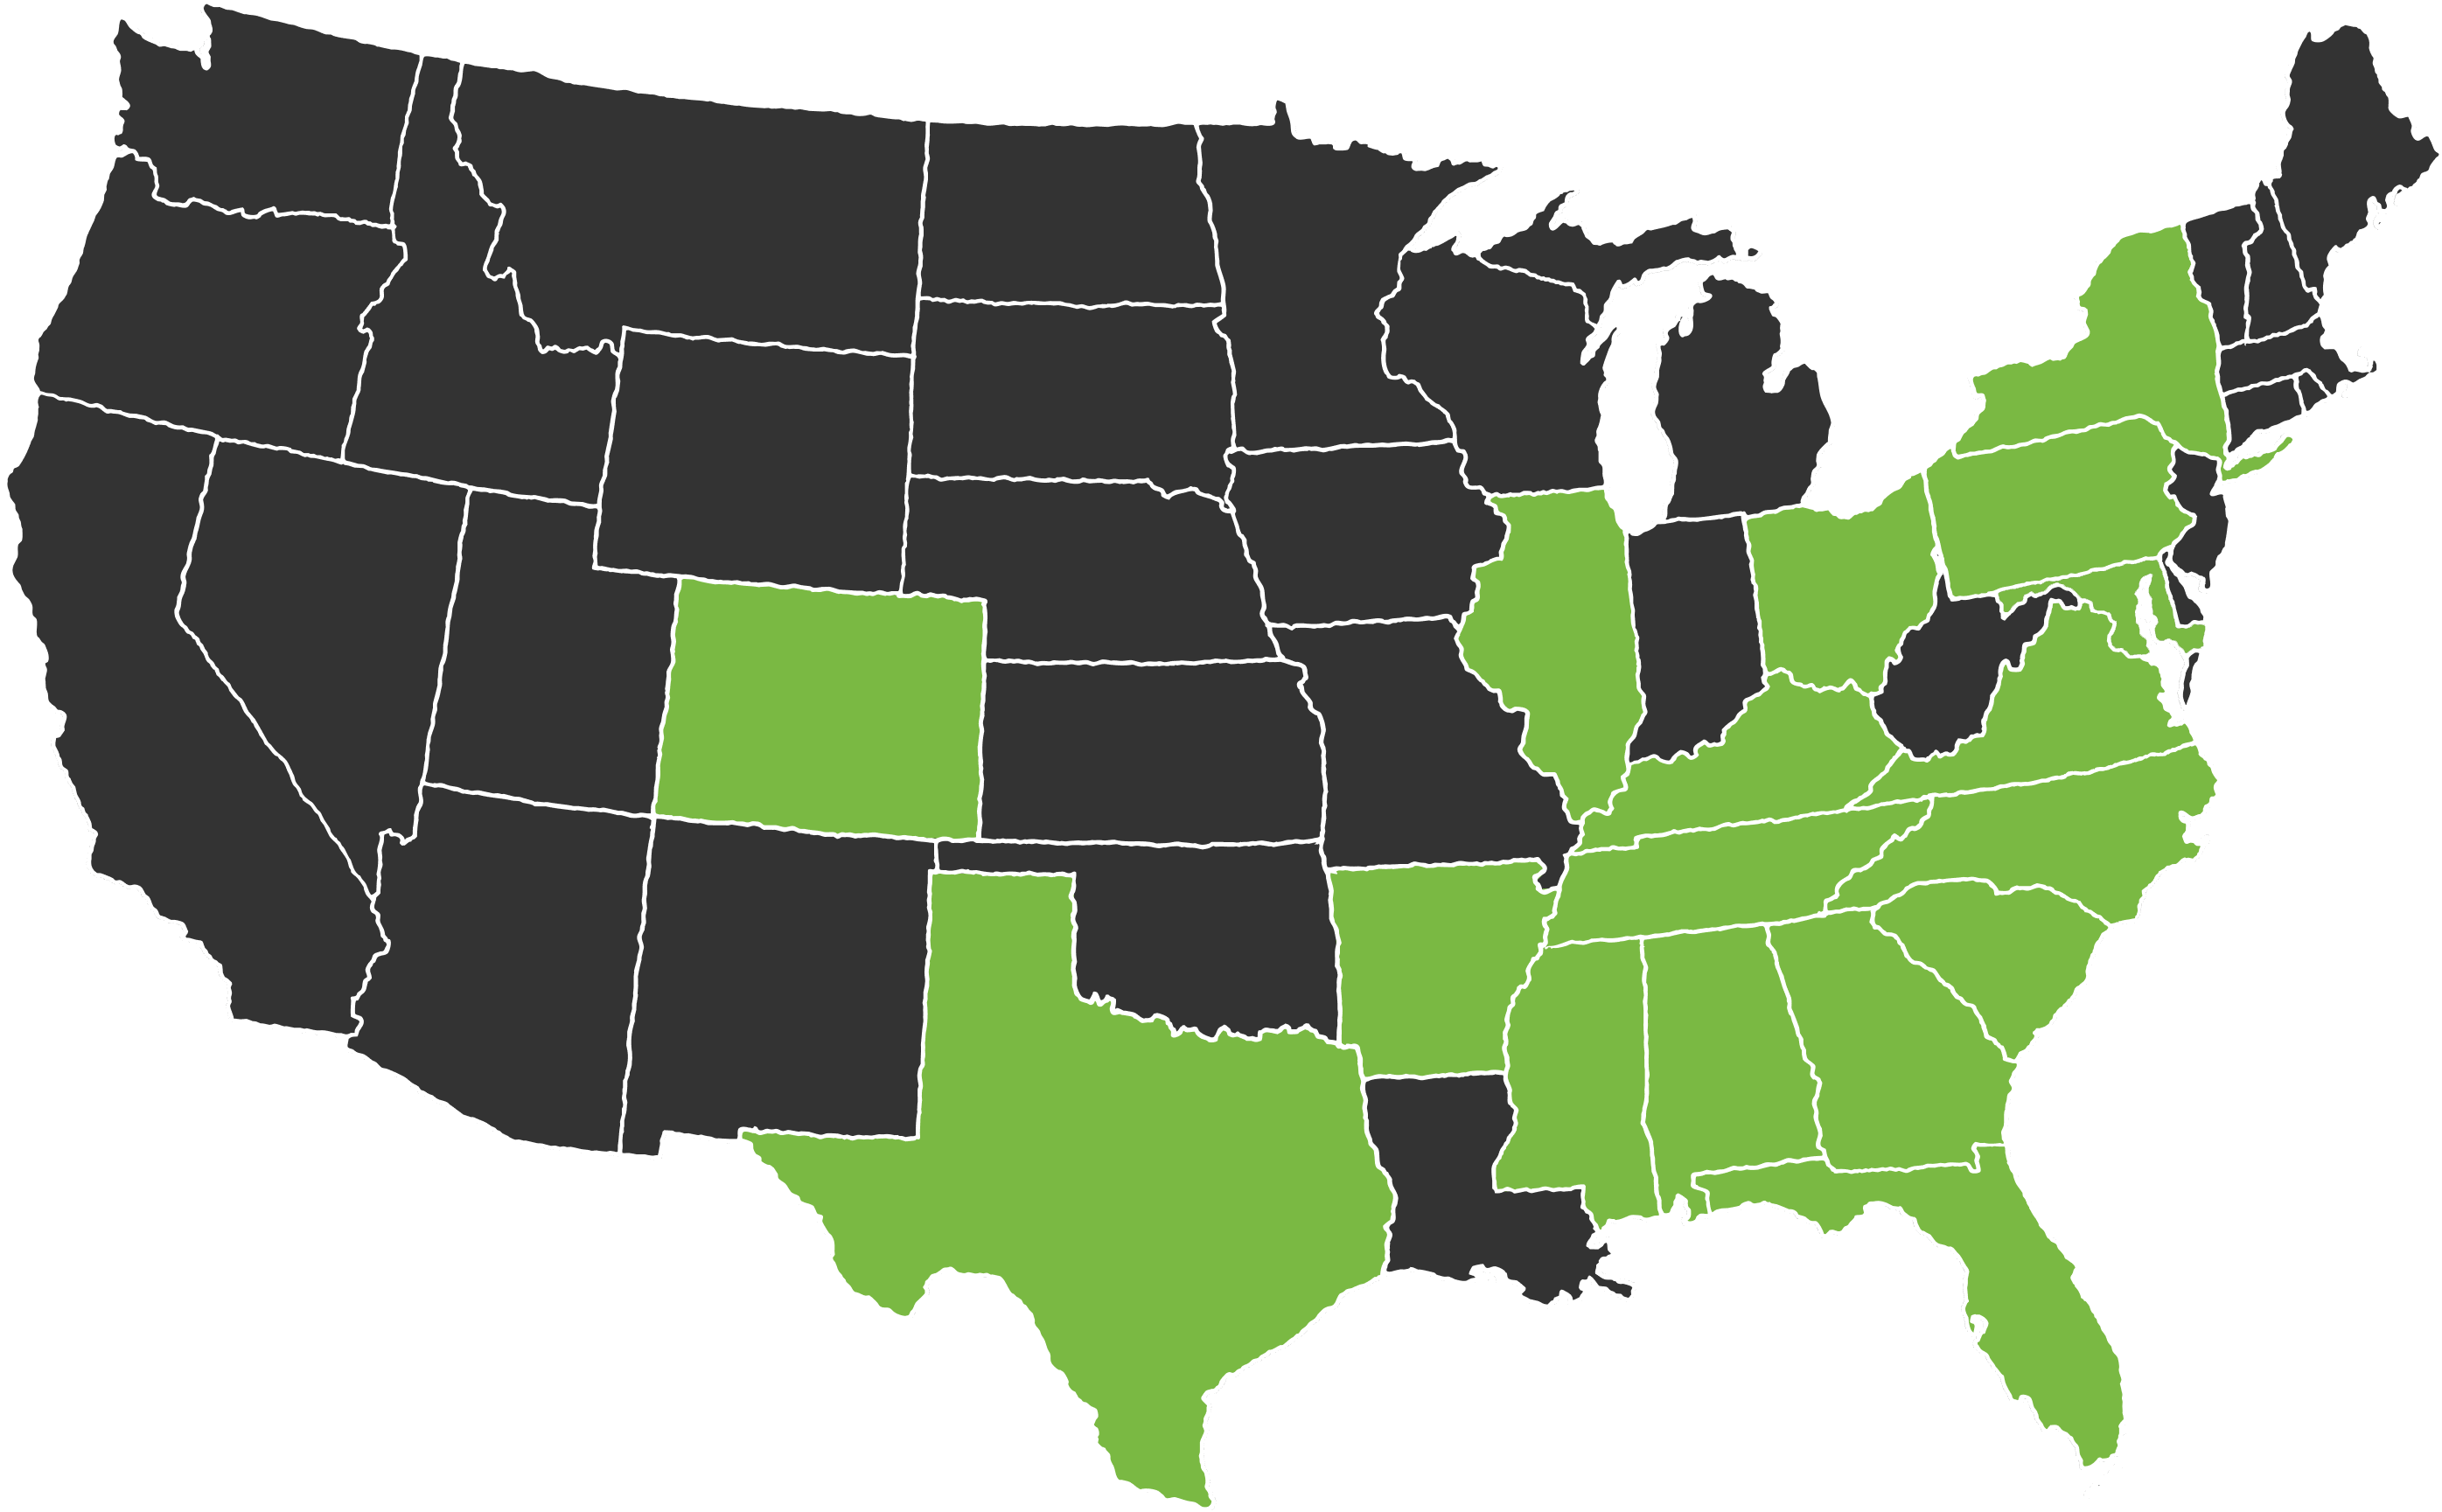 DKLEVY operates in 16 states across the United States.